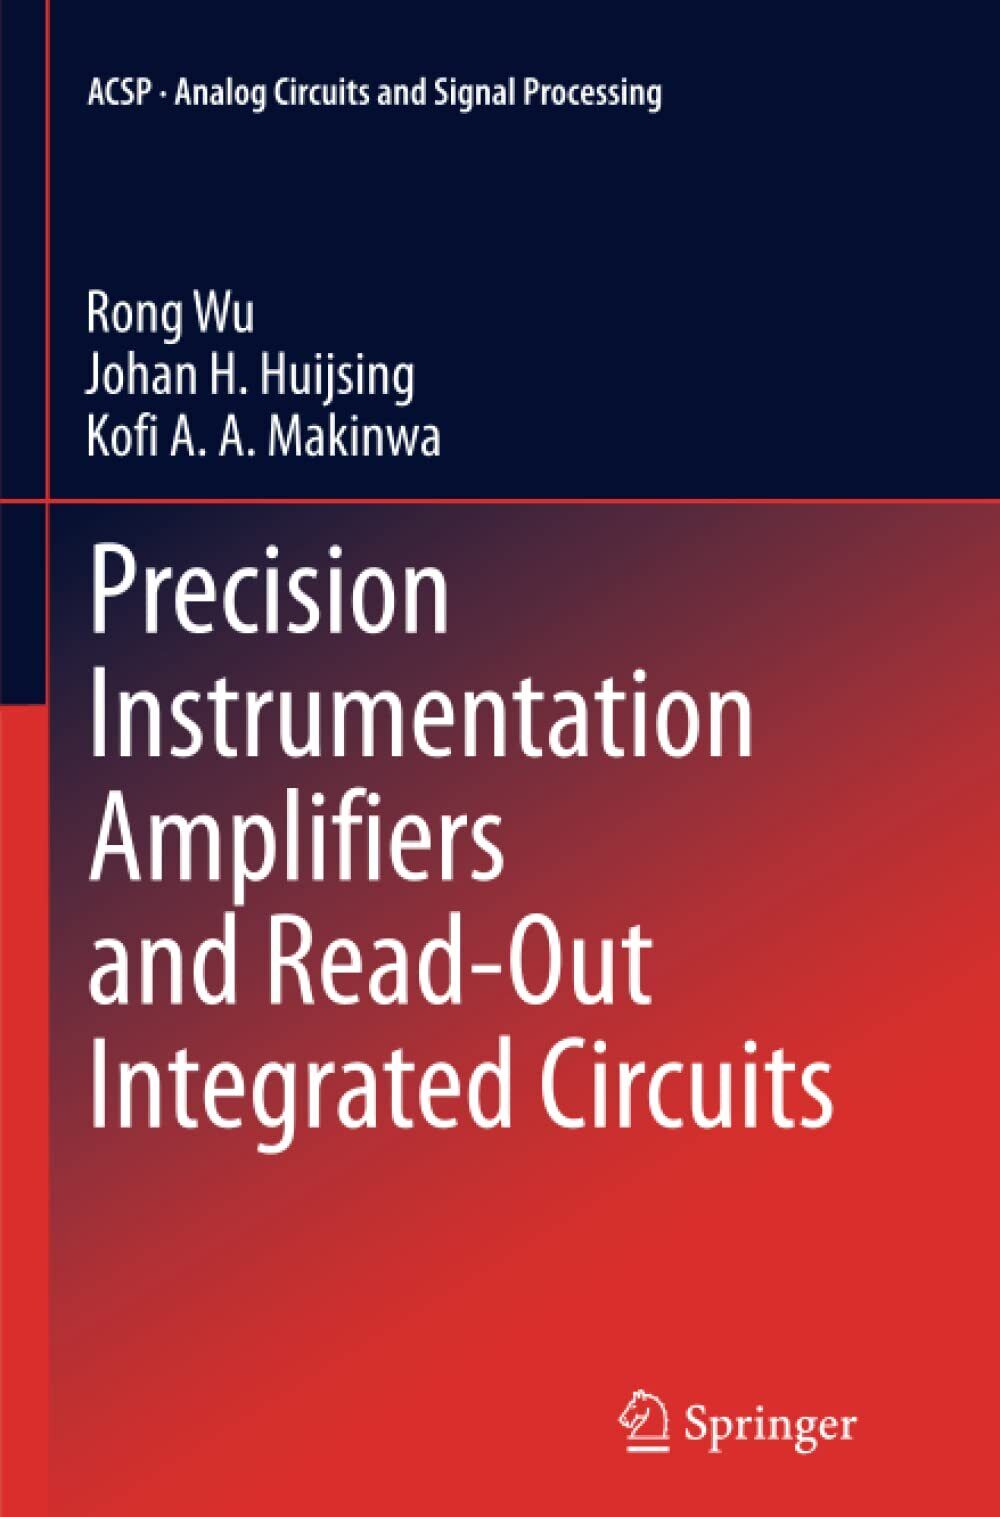 Precision Instrumentation Amplifiers and Read-Out Integrated Circuits - 2014